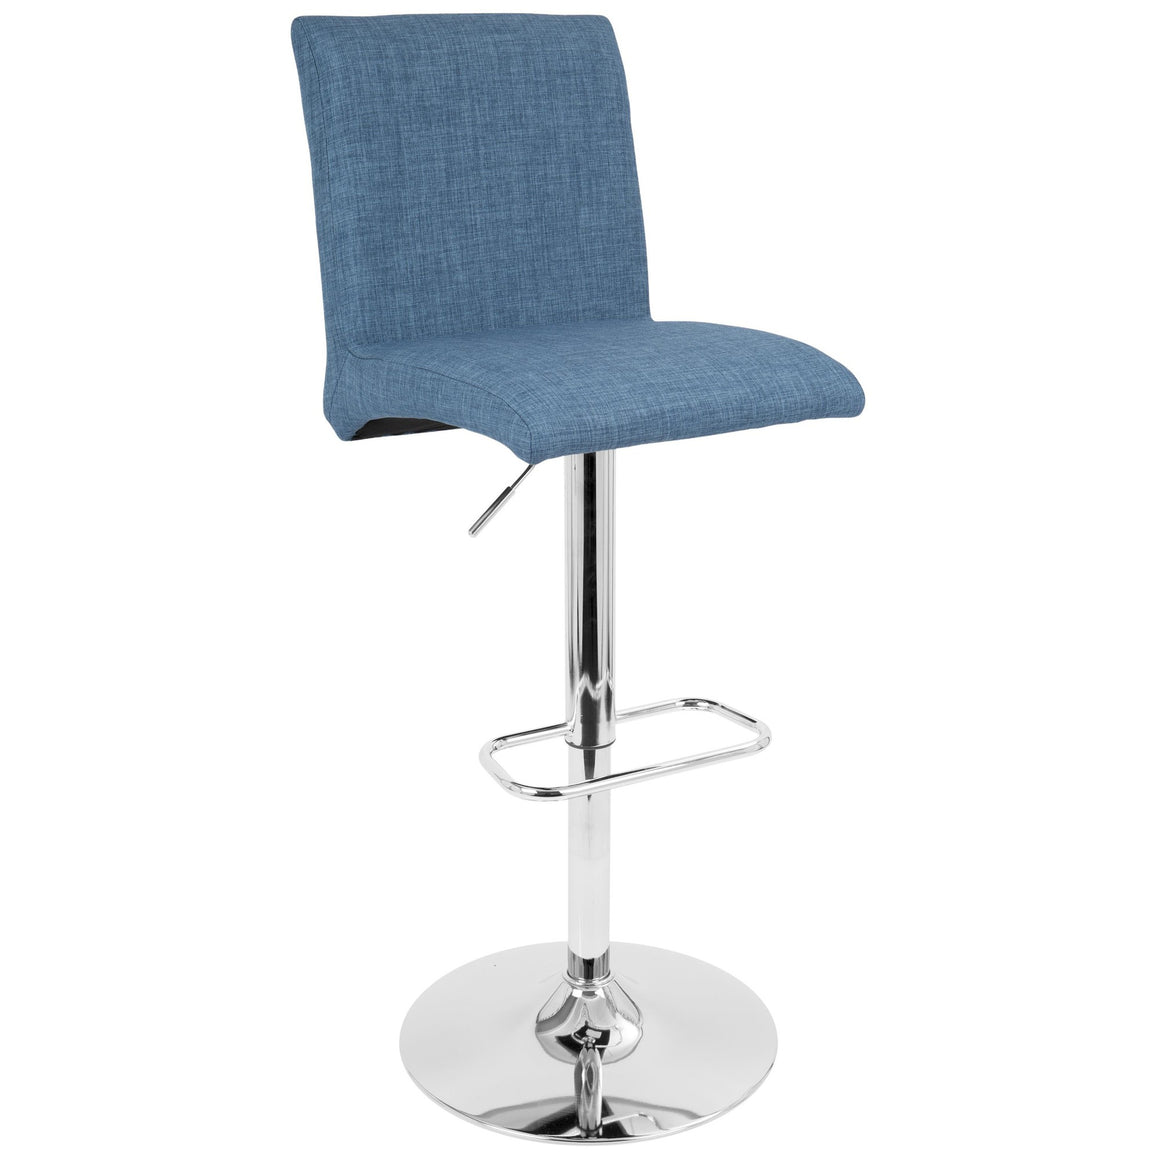 Tintori Contemporary Adjustable Barstool with Swivel in Blue by LumiSource